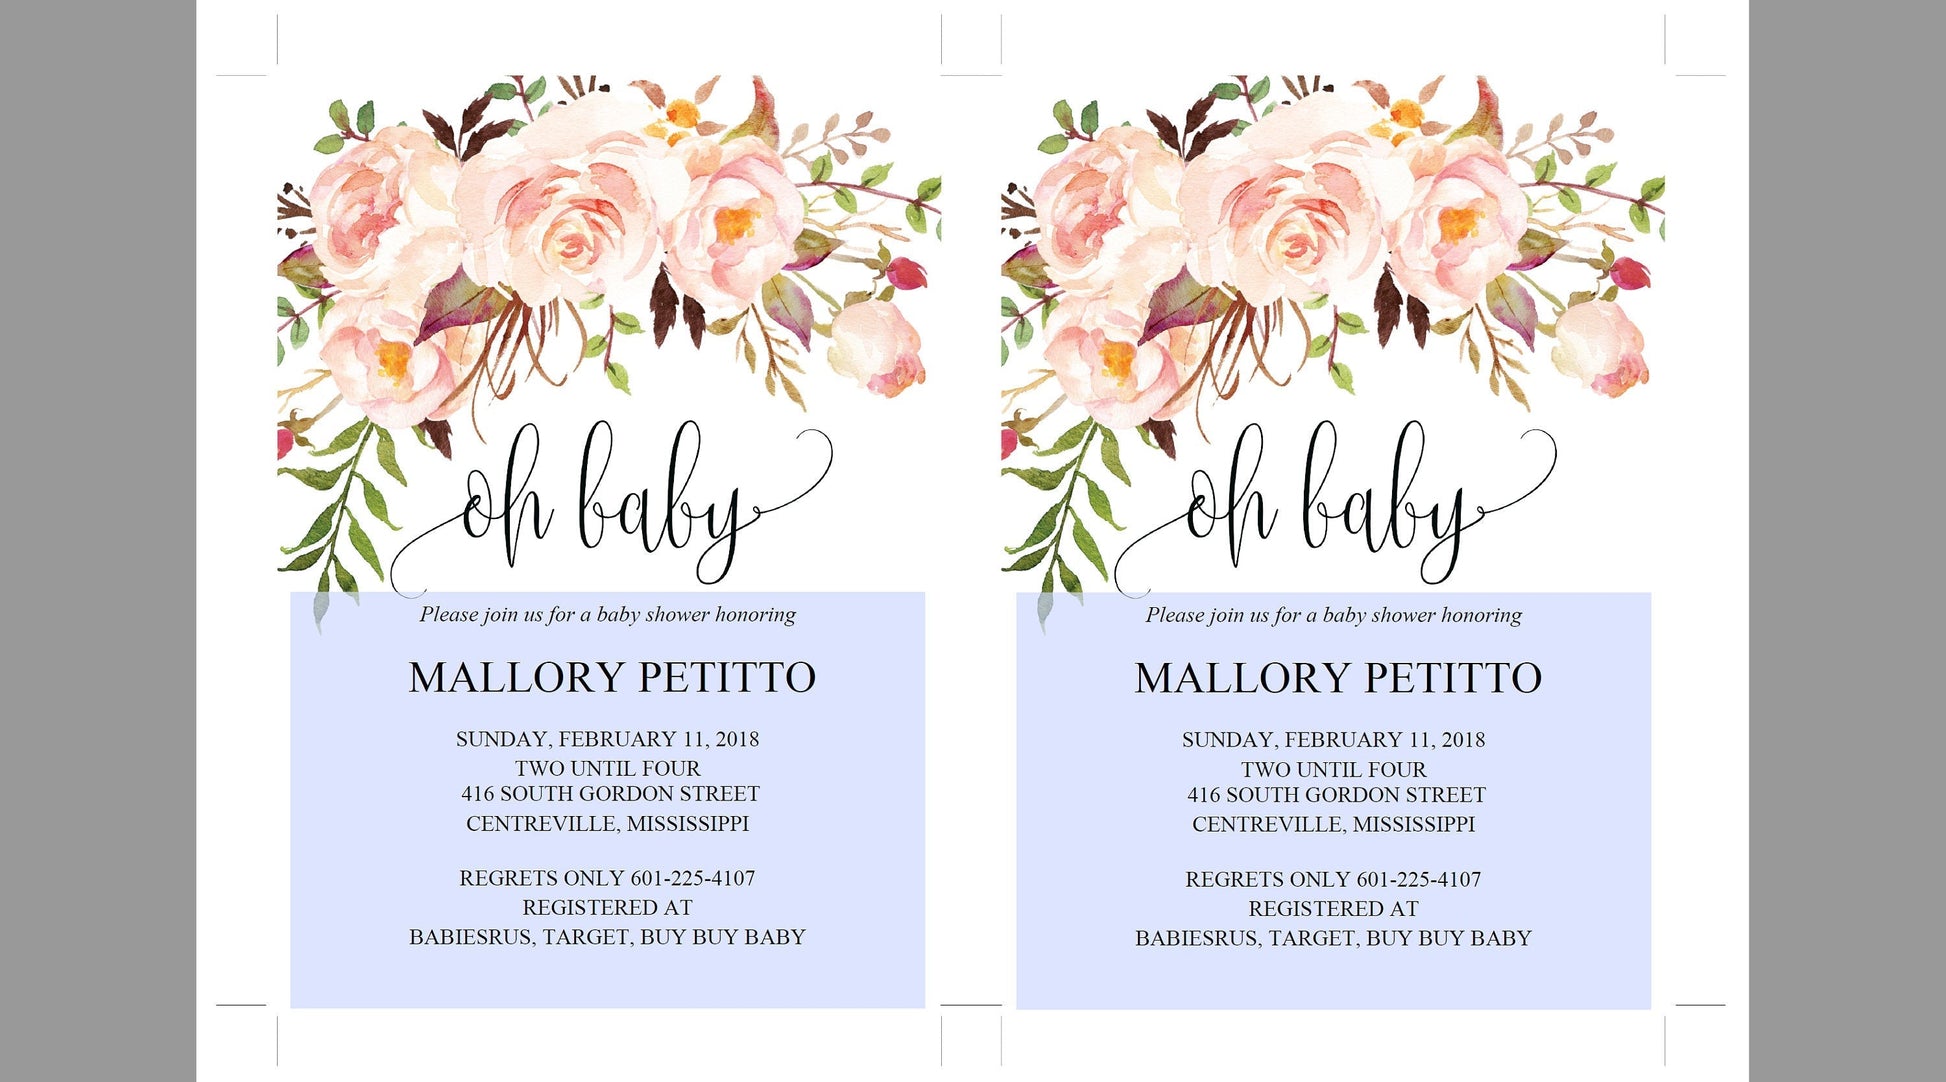 Printable Baby Shower Invitation Template, Oh Baby, Baby Shower invite,Invitation, Baby Shower Invites, Invite, Instant Download - MPU78  SAVVY PAPER CO